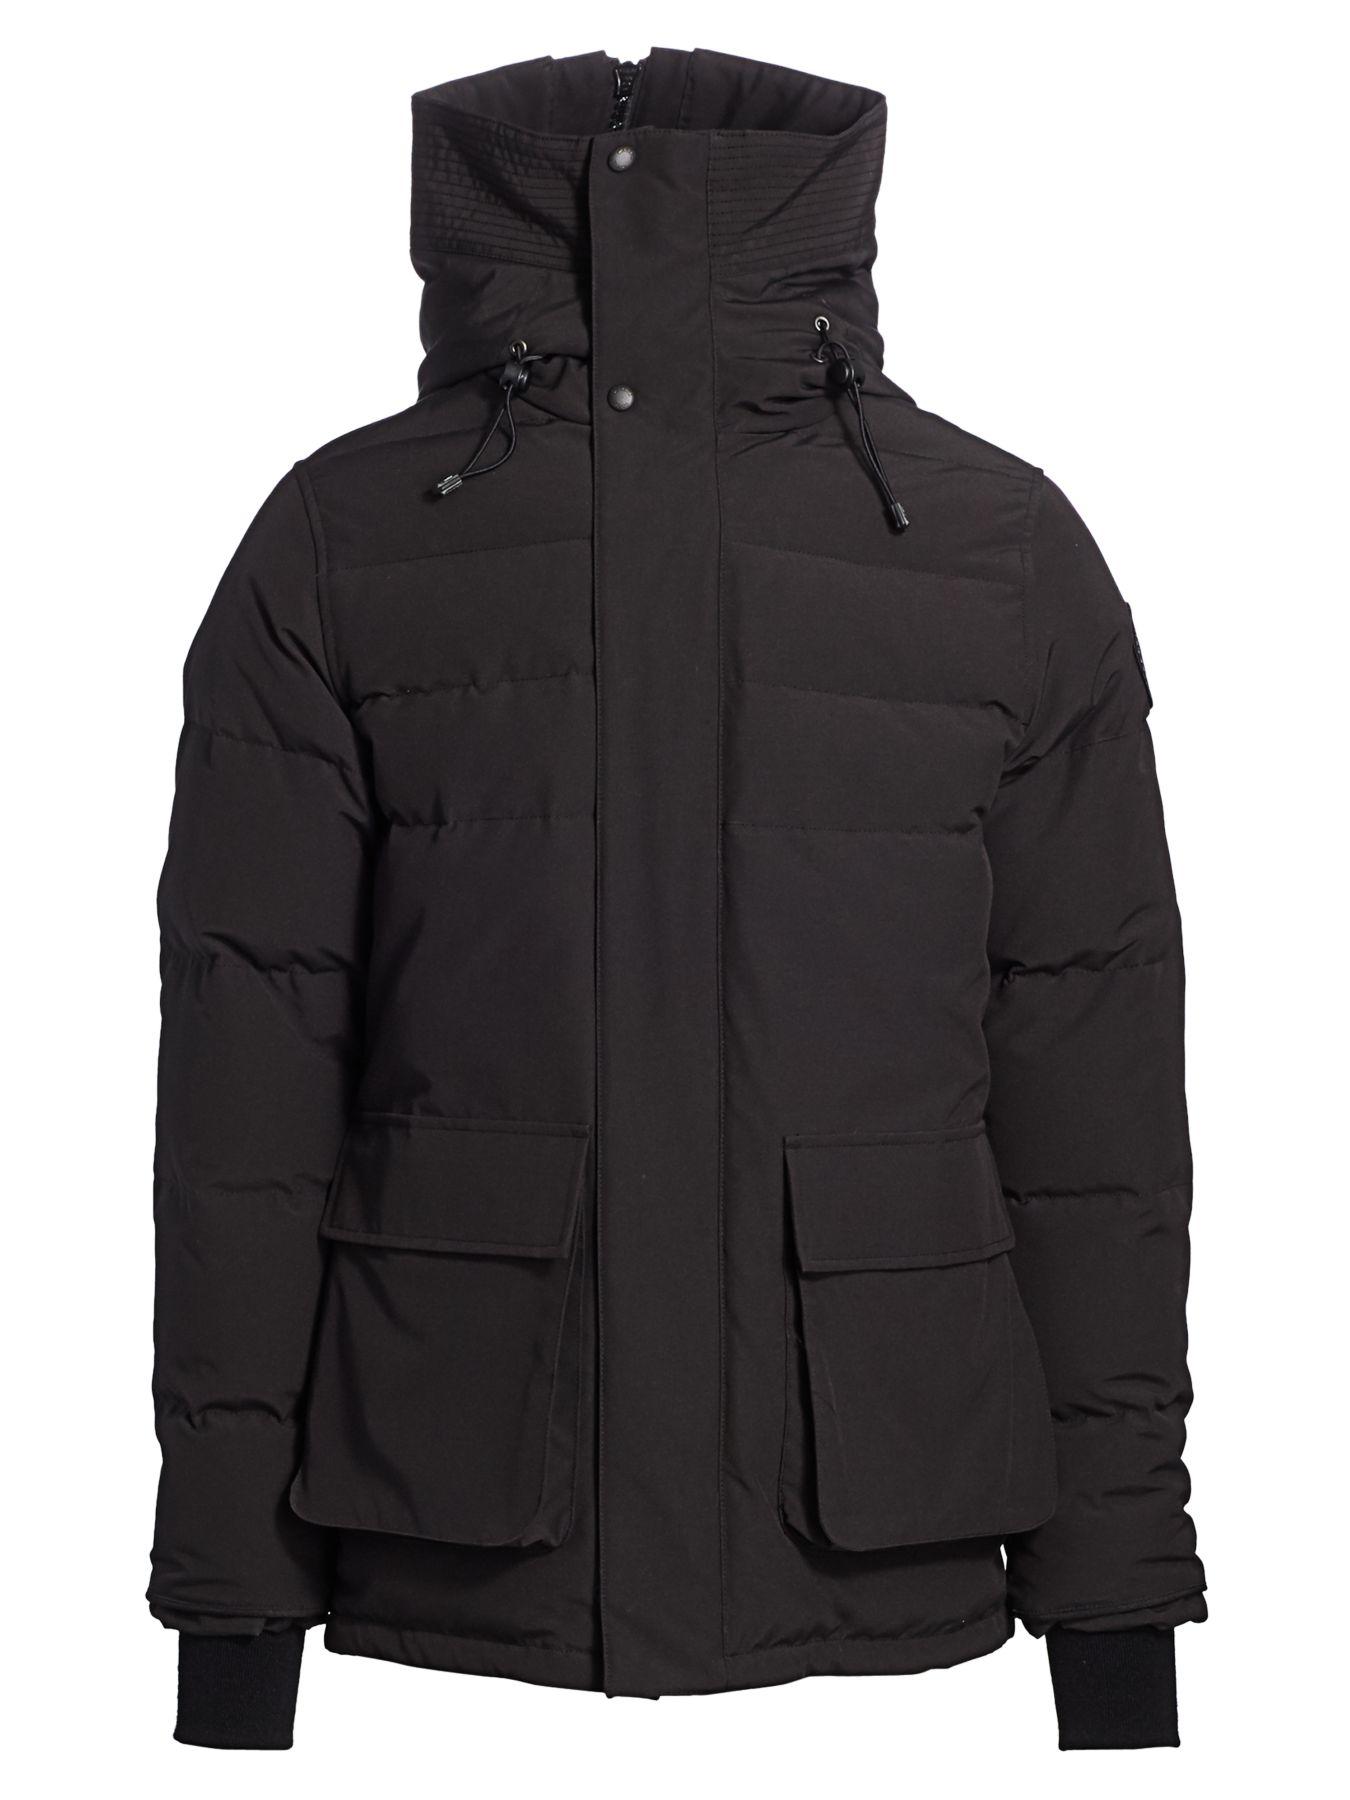 Canada Goose Synthetic Wedgemount Down-filled Parka in Black for Men - Lyst